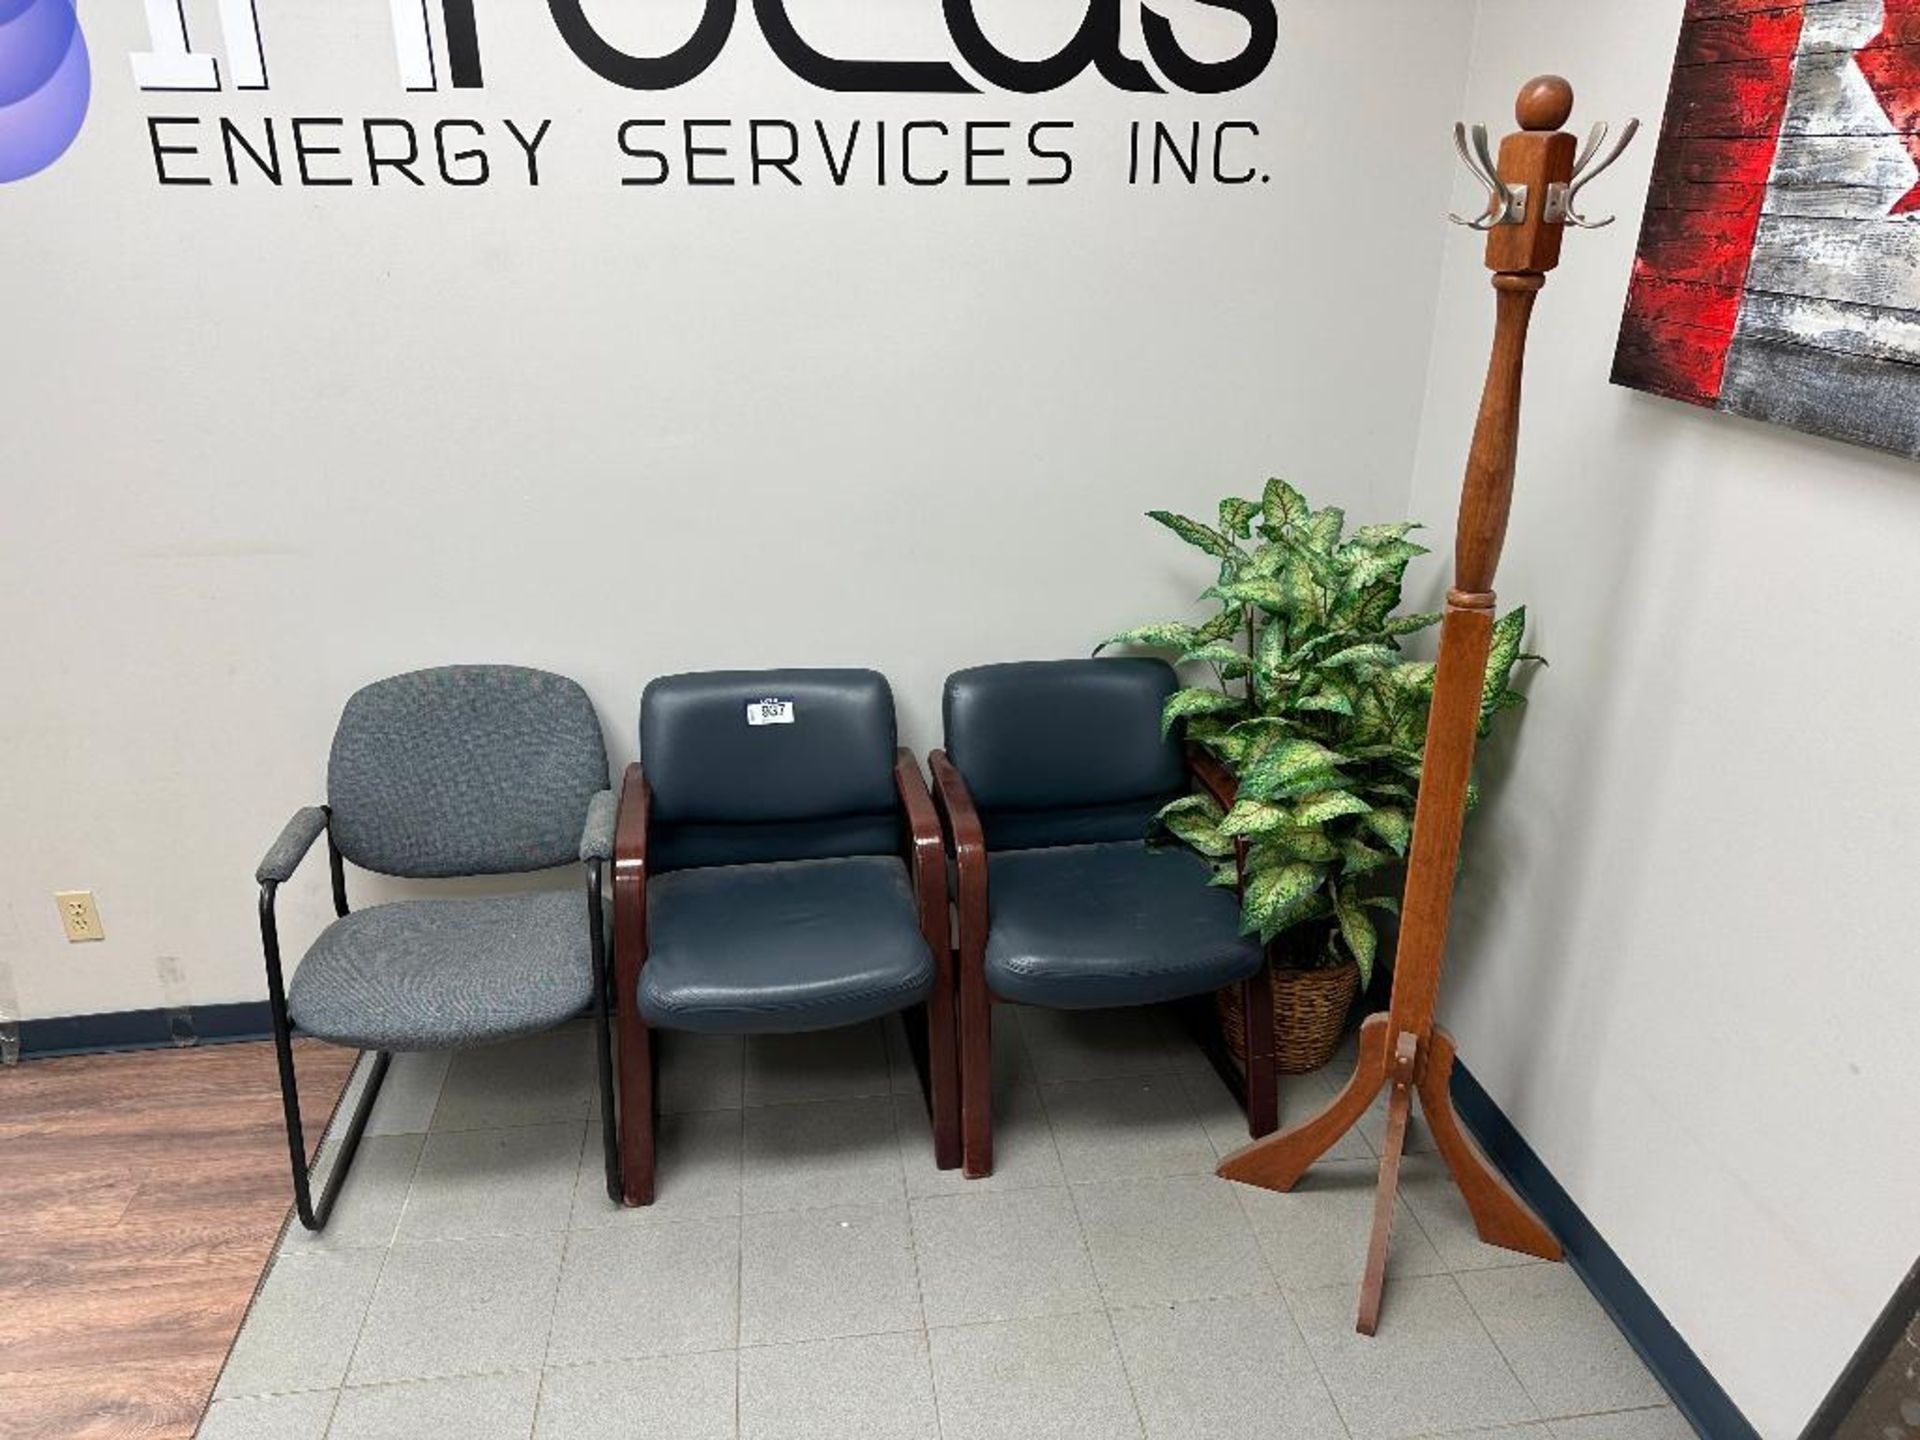 Lot of (3) Side Chairs, (1) Fake Plant, and (1) Coat Rack - Image 2 of 5